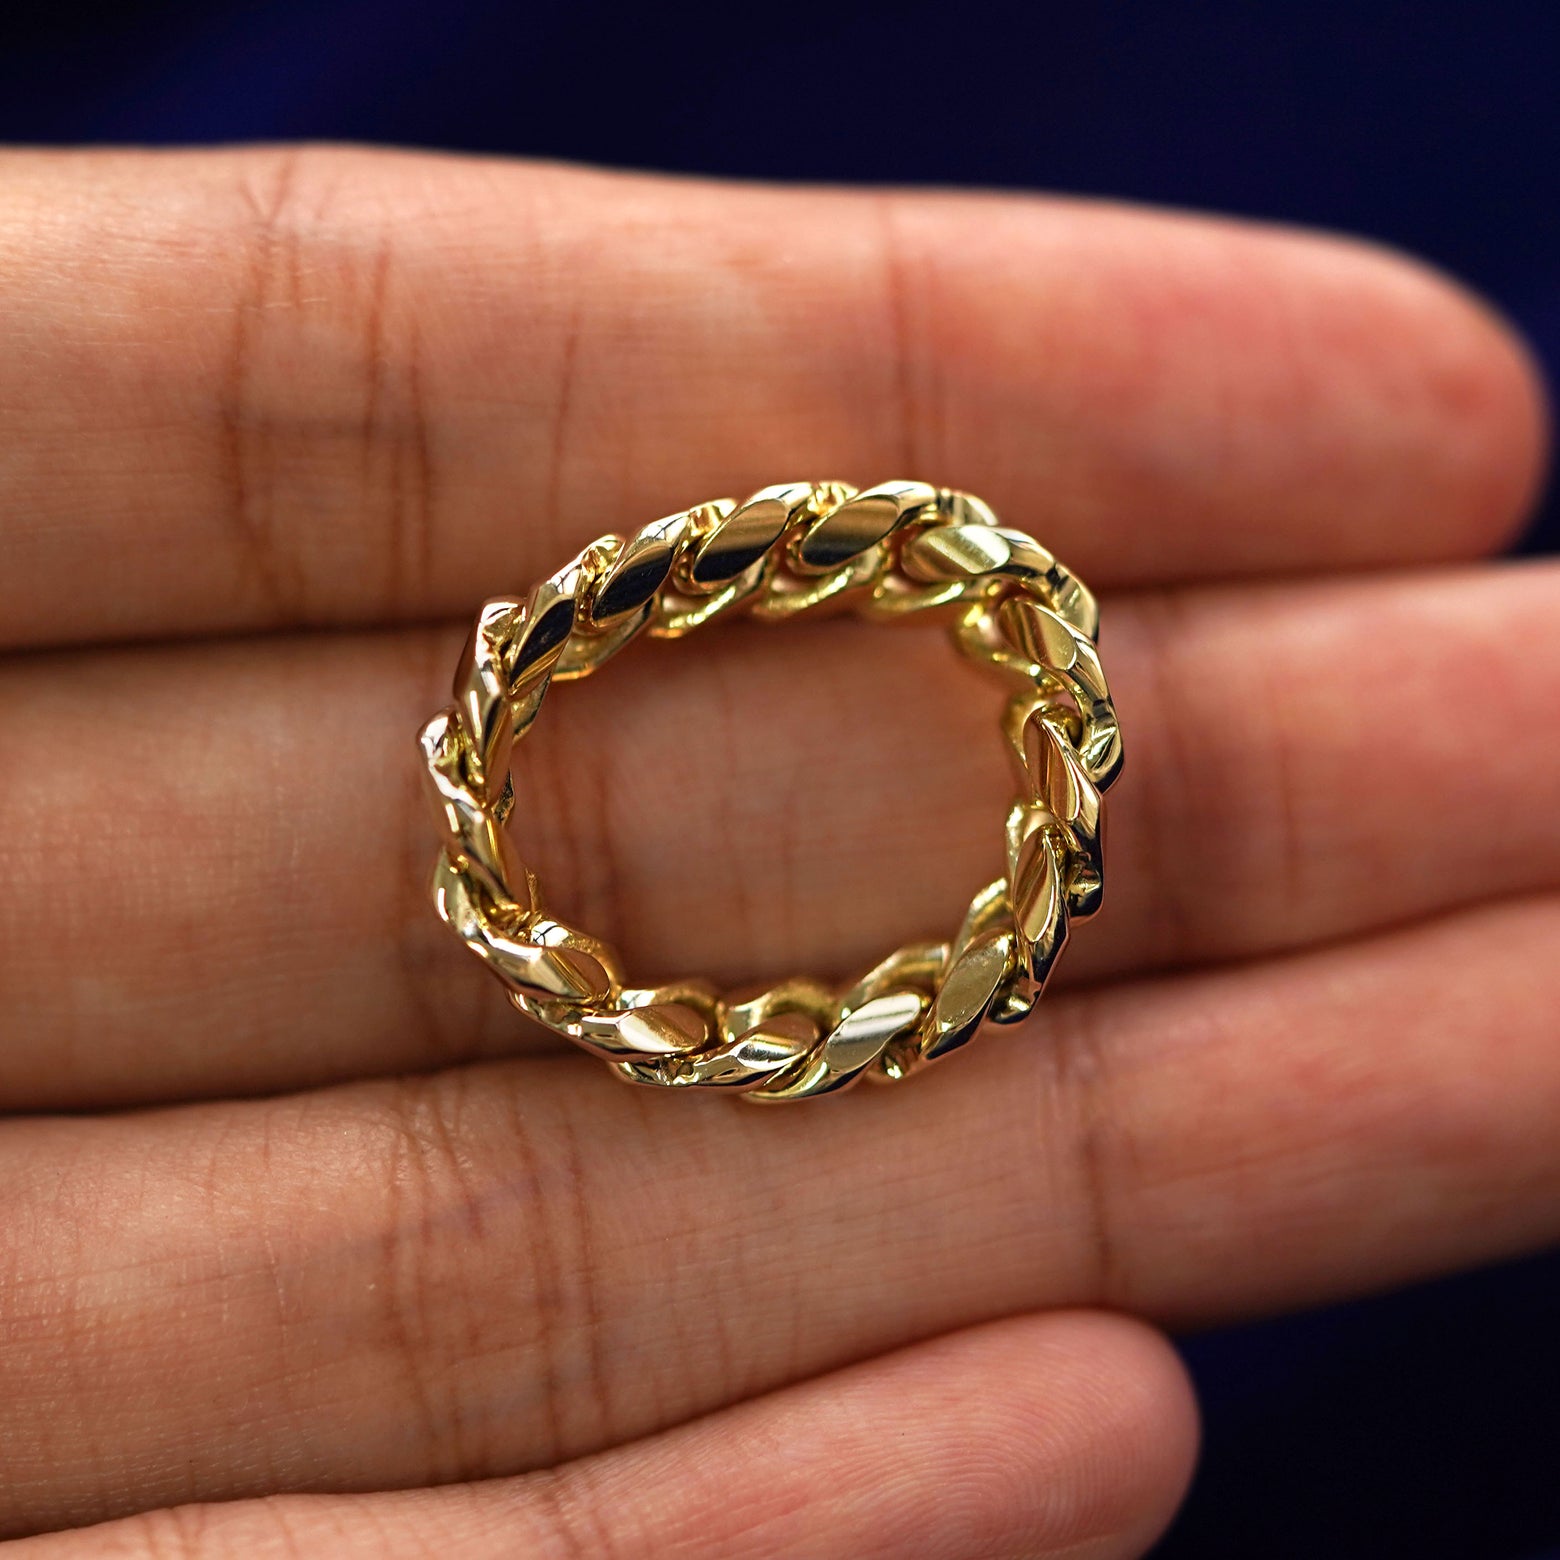 A yellow gold Miami Chain Ring in a model's hand showing the thickness of the chain